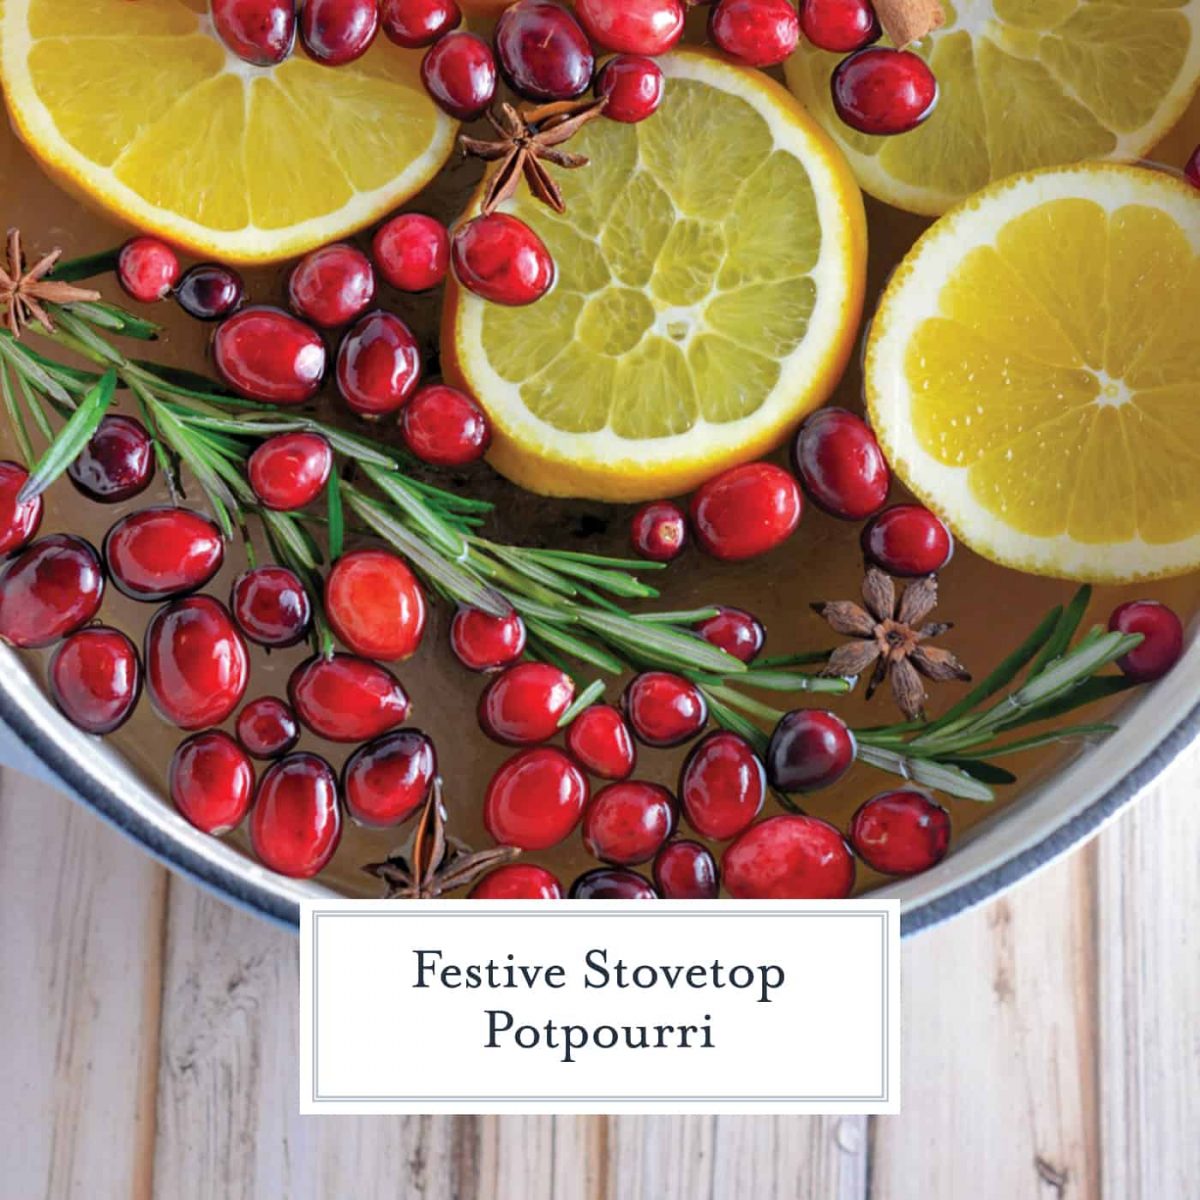 Stovetop Potpourri is a simple way to crank up the holiday cheer in your home using ingredients you probably already have in your refrigerator.  #aromatics #stovetoppotourri www.savoryexperiments.com